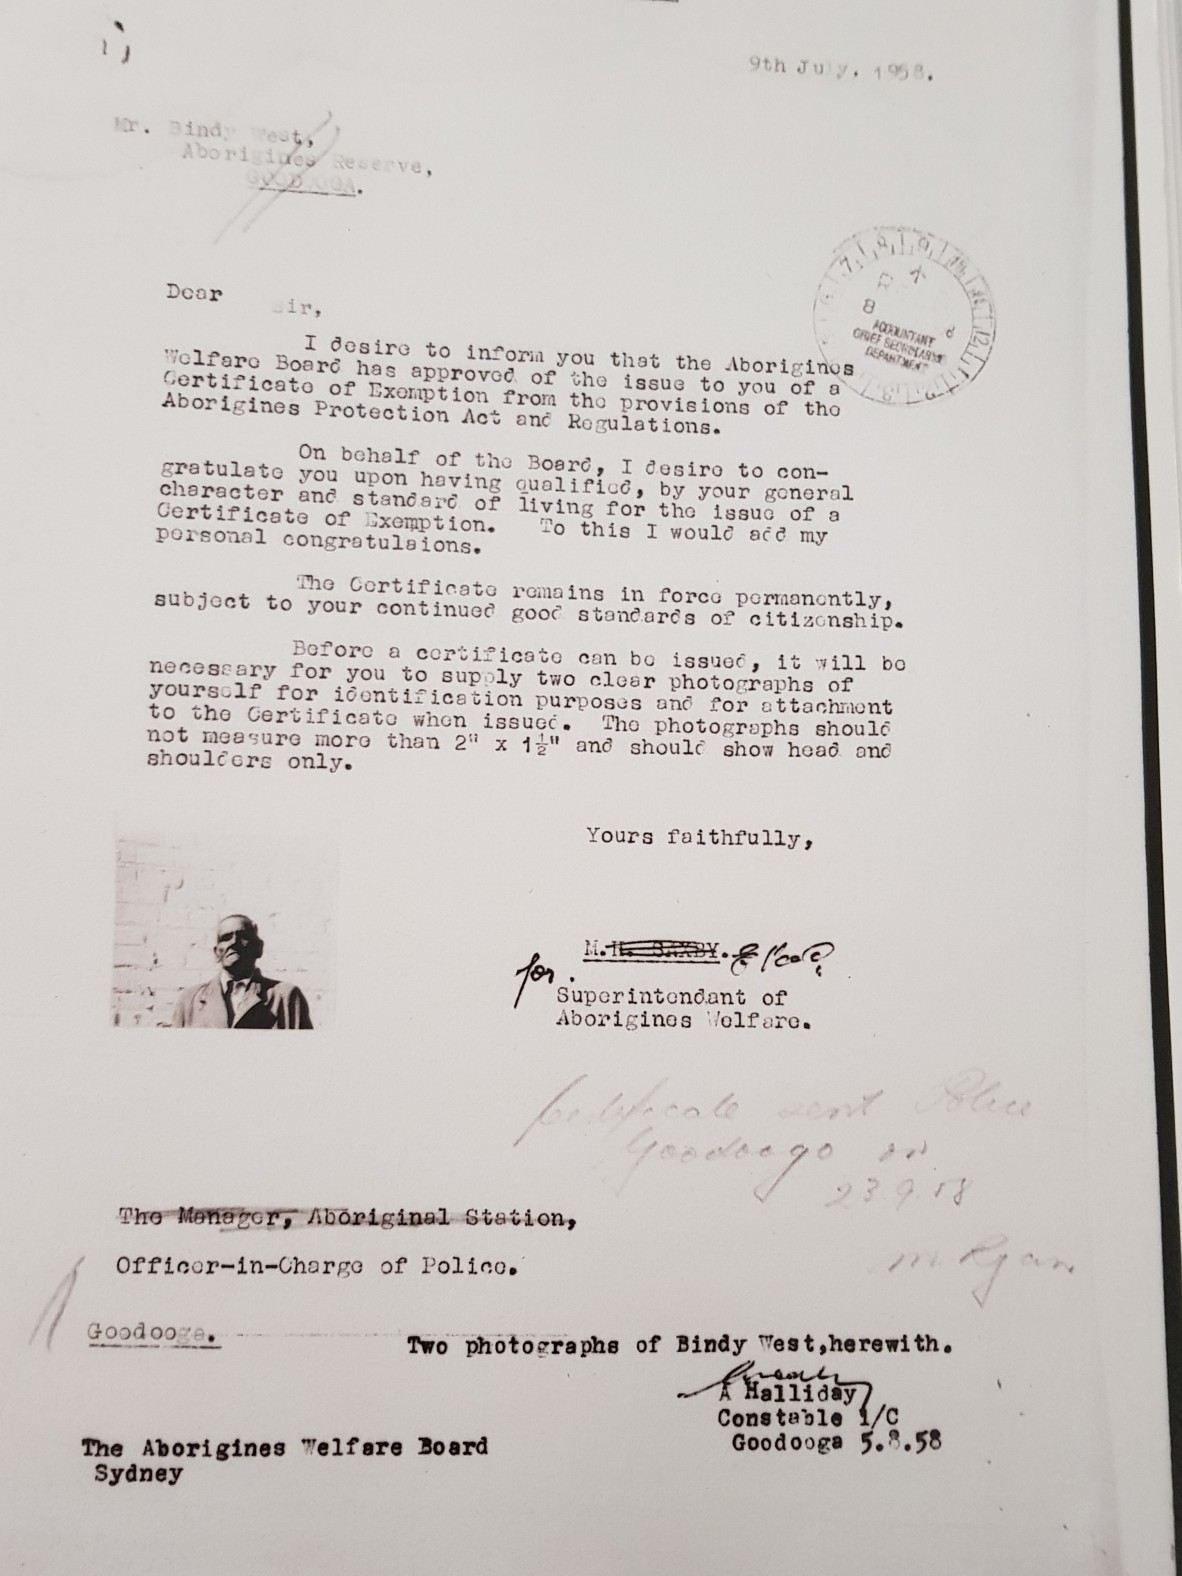 Bindi West’s Approval Letter for the Issue of a Certificate of Exemption from the Aborigines Protection Act. Apparently he was deemed worthy by government officials.